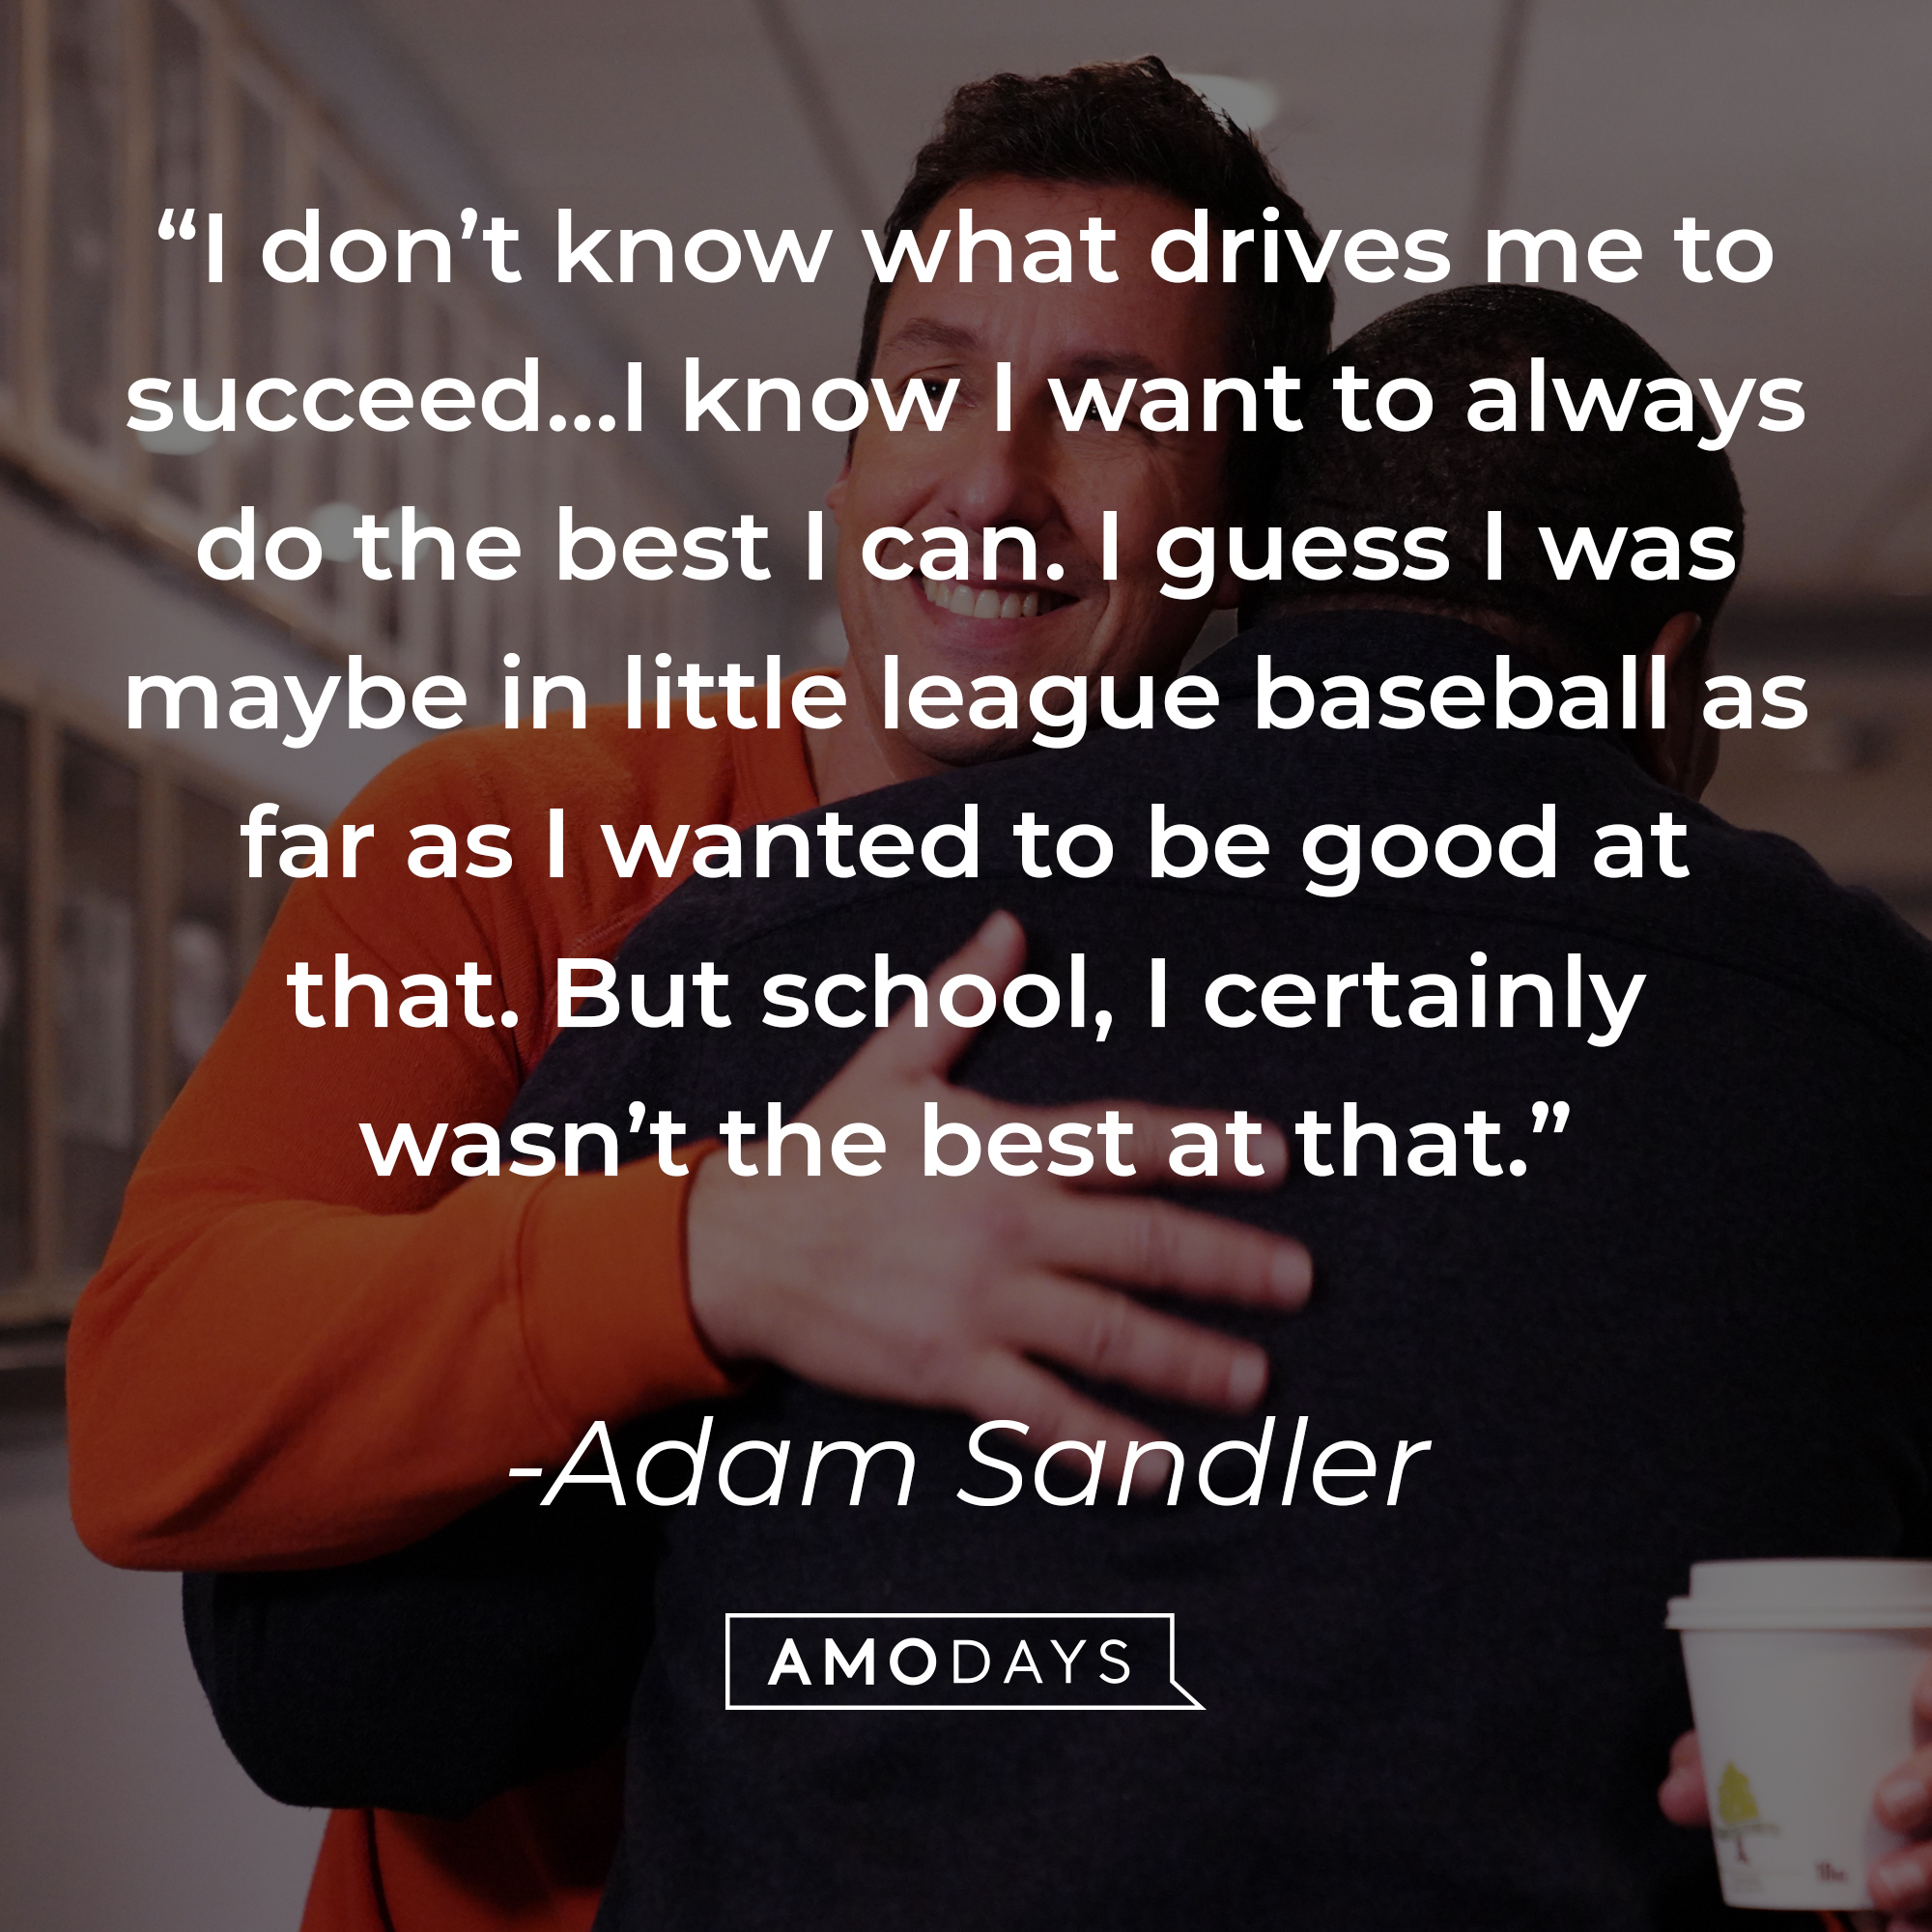 Adam Sandler's quote: “I don’t know what drives me to succeed…I know I want to always do the best I can. I guess I was maybe in little league baseball as far as I wanted to be good at that. But school, I certainly wasn’t the best at that.” | Source: Getty Images